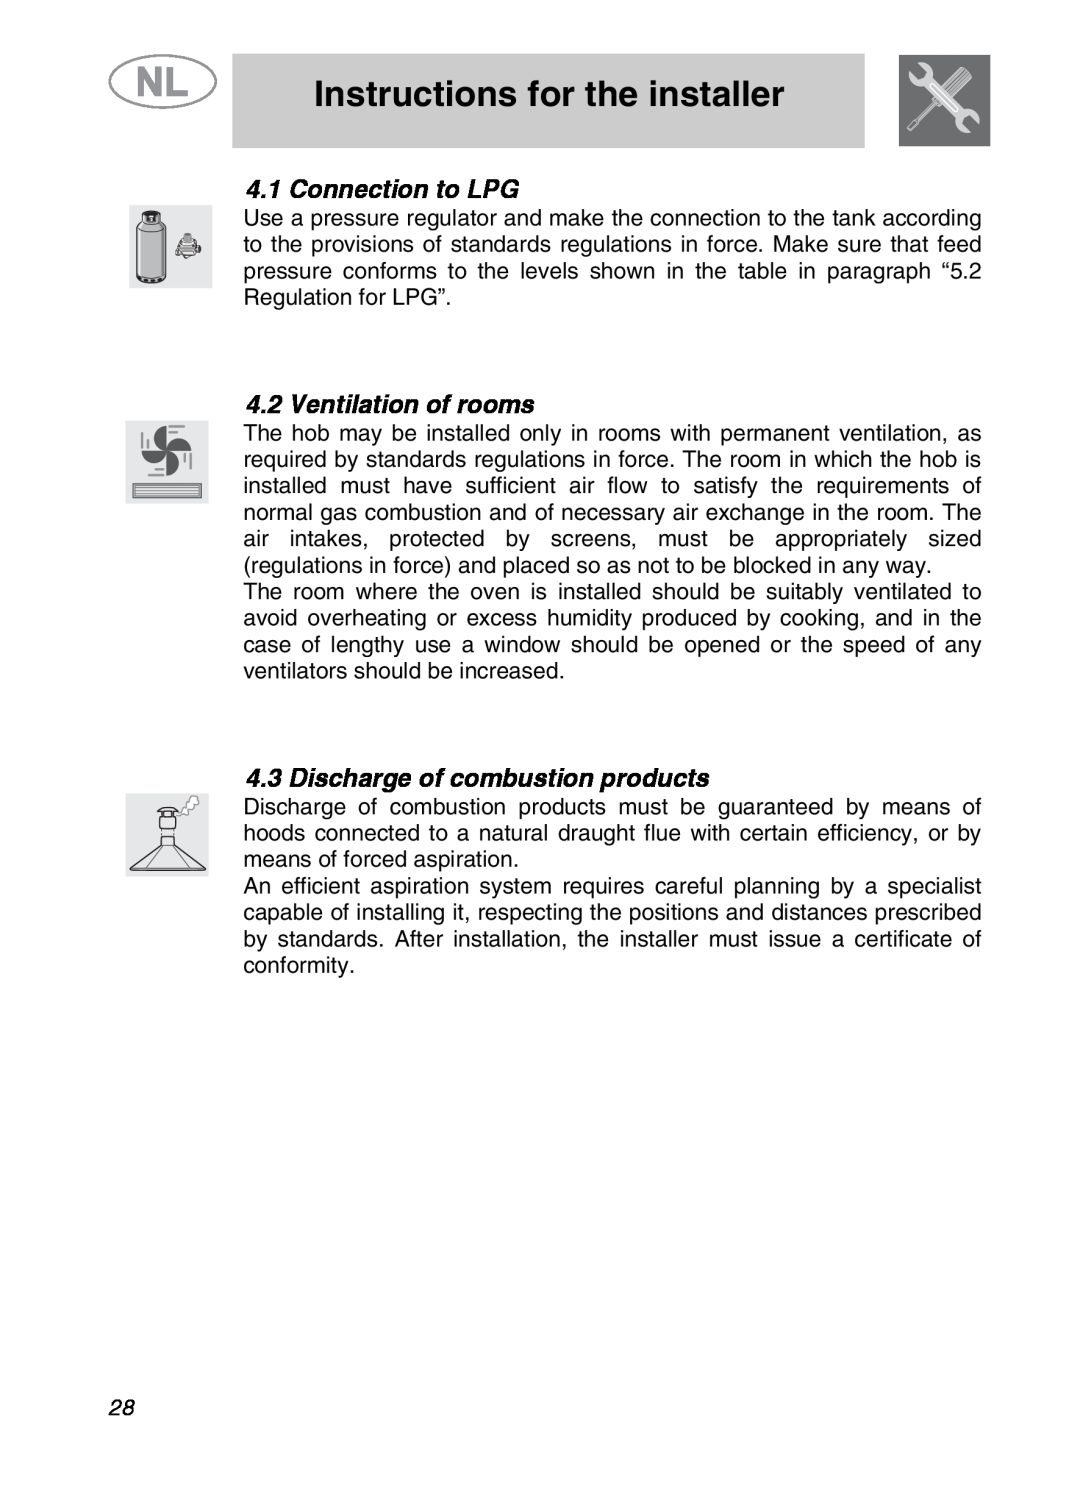 Smeg GKC641-3 Connection to LPG, Ventilation of rooms, Discharge of combustion products, Instructions for the installer 